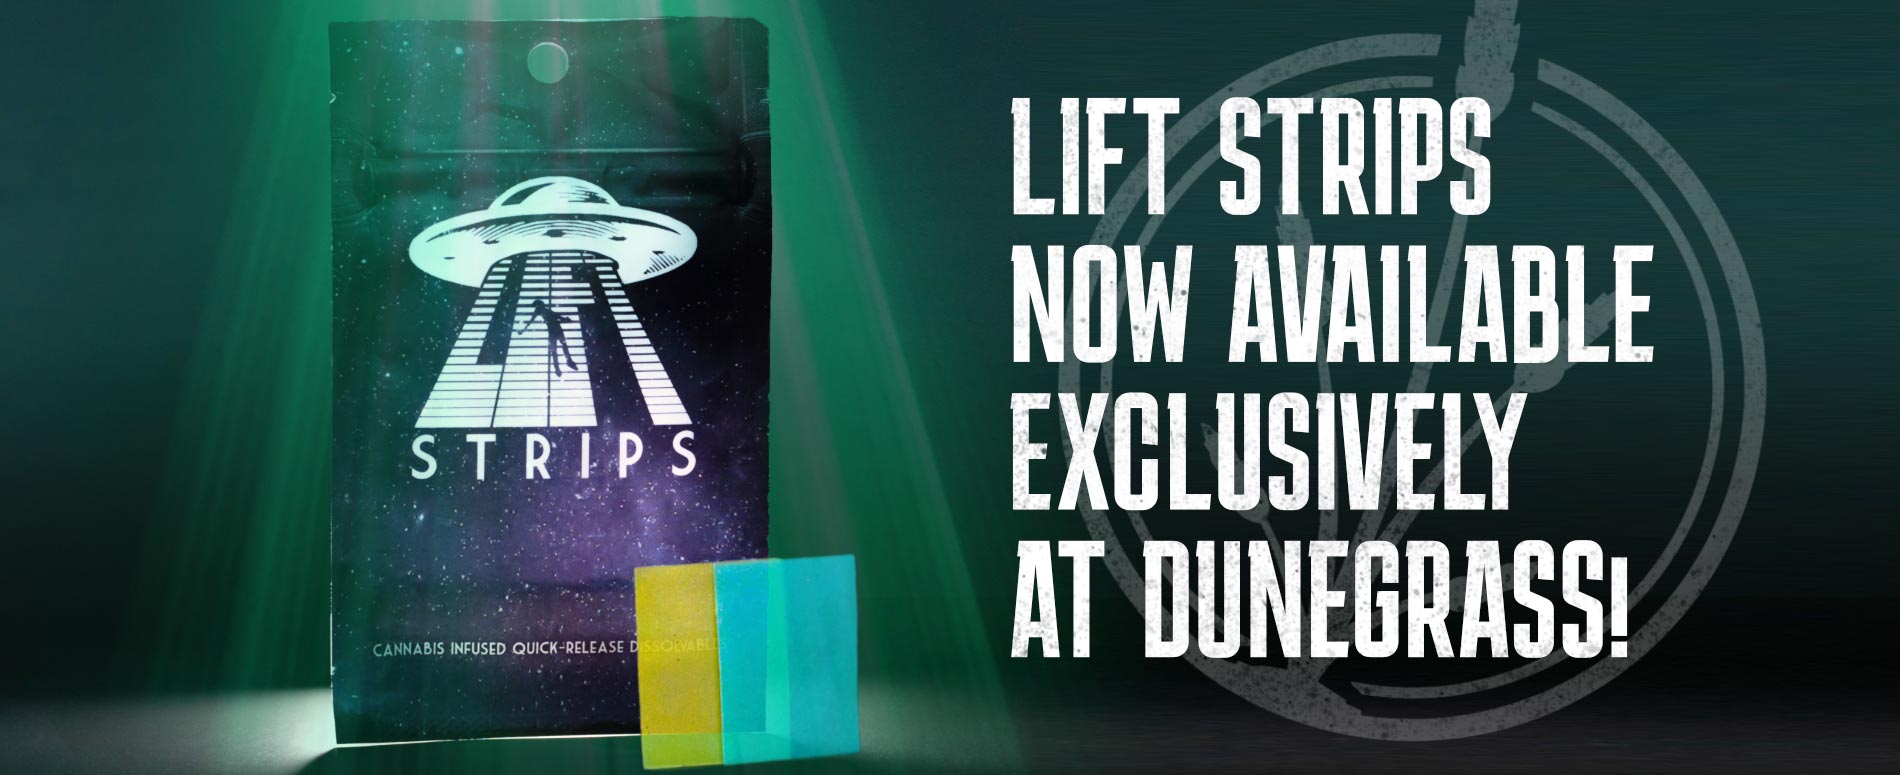 Lift Strips now available exclusively at Dunegrass!